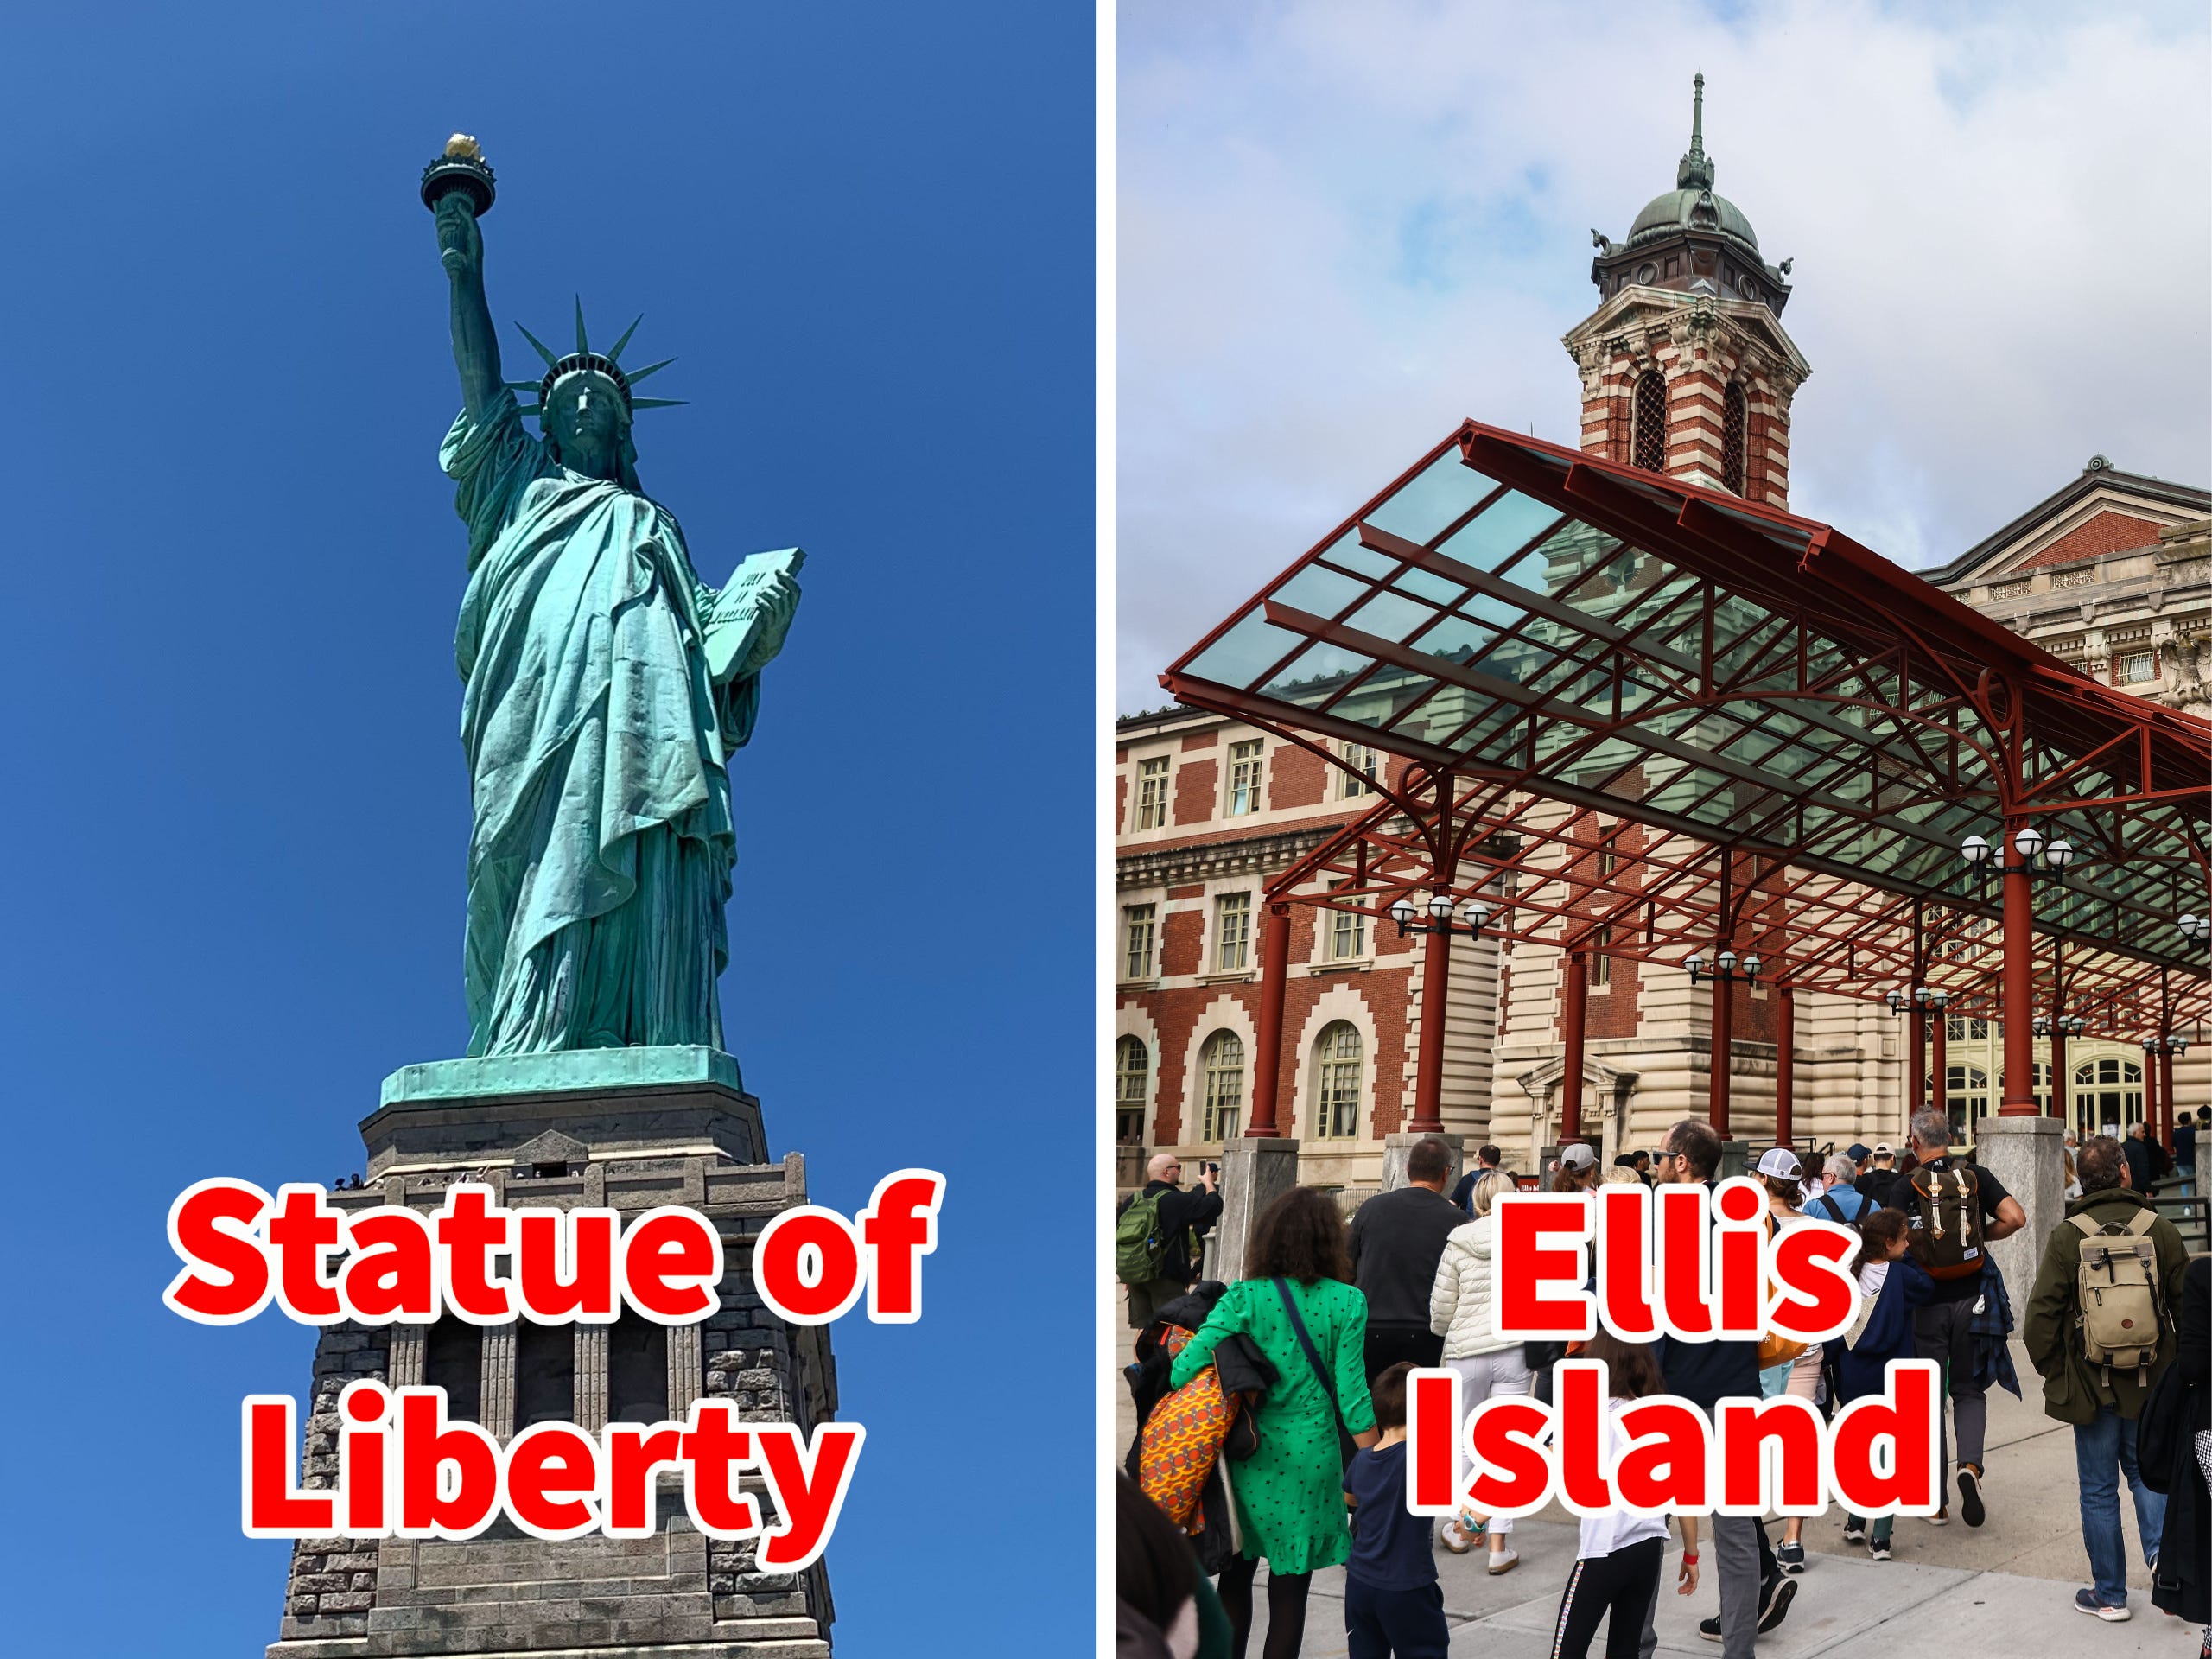 <p>Last year, during my first visit to the Statue of Liberty, I was surprised by how much I got out of the experience.</p><p>I took a tour with my parents, departing by ferry from Manhattan's Battery Park neighborhood. Our <a href="https://www.cityexperiences.com/new-york/city-cruises/statue/search-result/?date=20230815&destination=Reserve+Ticket" rel="noopener">general admissions tickets</a>, which were about $25 each, got us access to two destinations: The Statue of Liberty and Ellis Island. </p><p>The first stop was Liberty Island, home to Lady Liberty herself, where we walked around its perimeter, admiring the monument and city views. </p><p>What I really enjoyed, and will recommend to anyone visiting New York, was Ellis Island. Having seen millions of immigrants pass through, Ellis Island and its accompanying museum are a remarkable reminder of the country's immigration history.</p><p>My only regret was that I couldn't spend more time walking through the museum.</p>